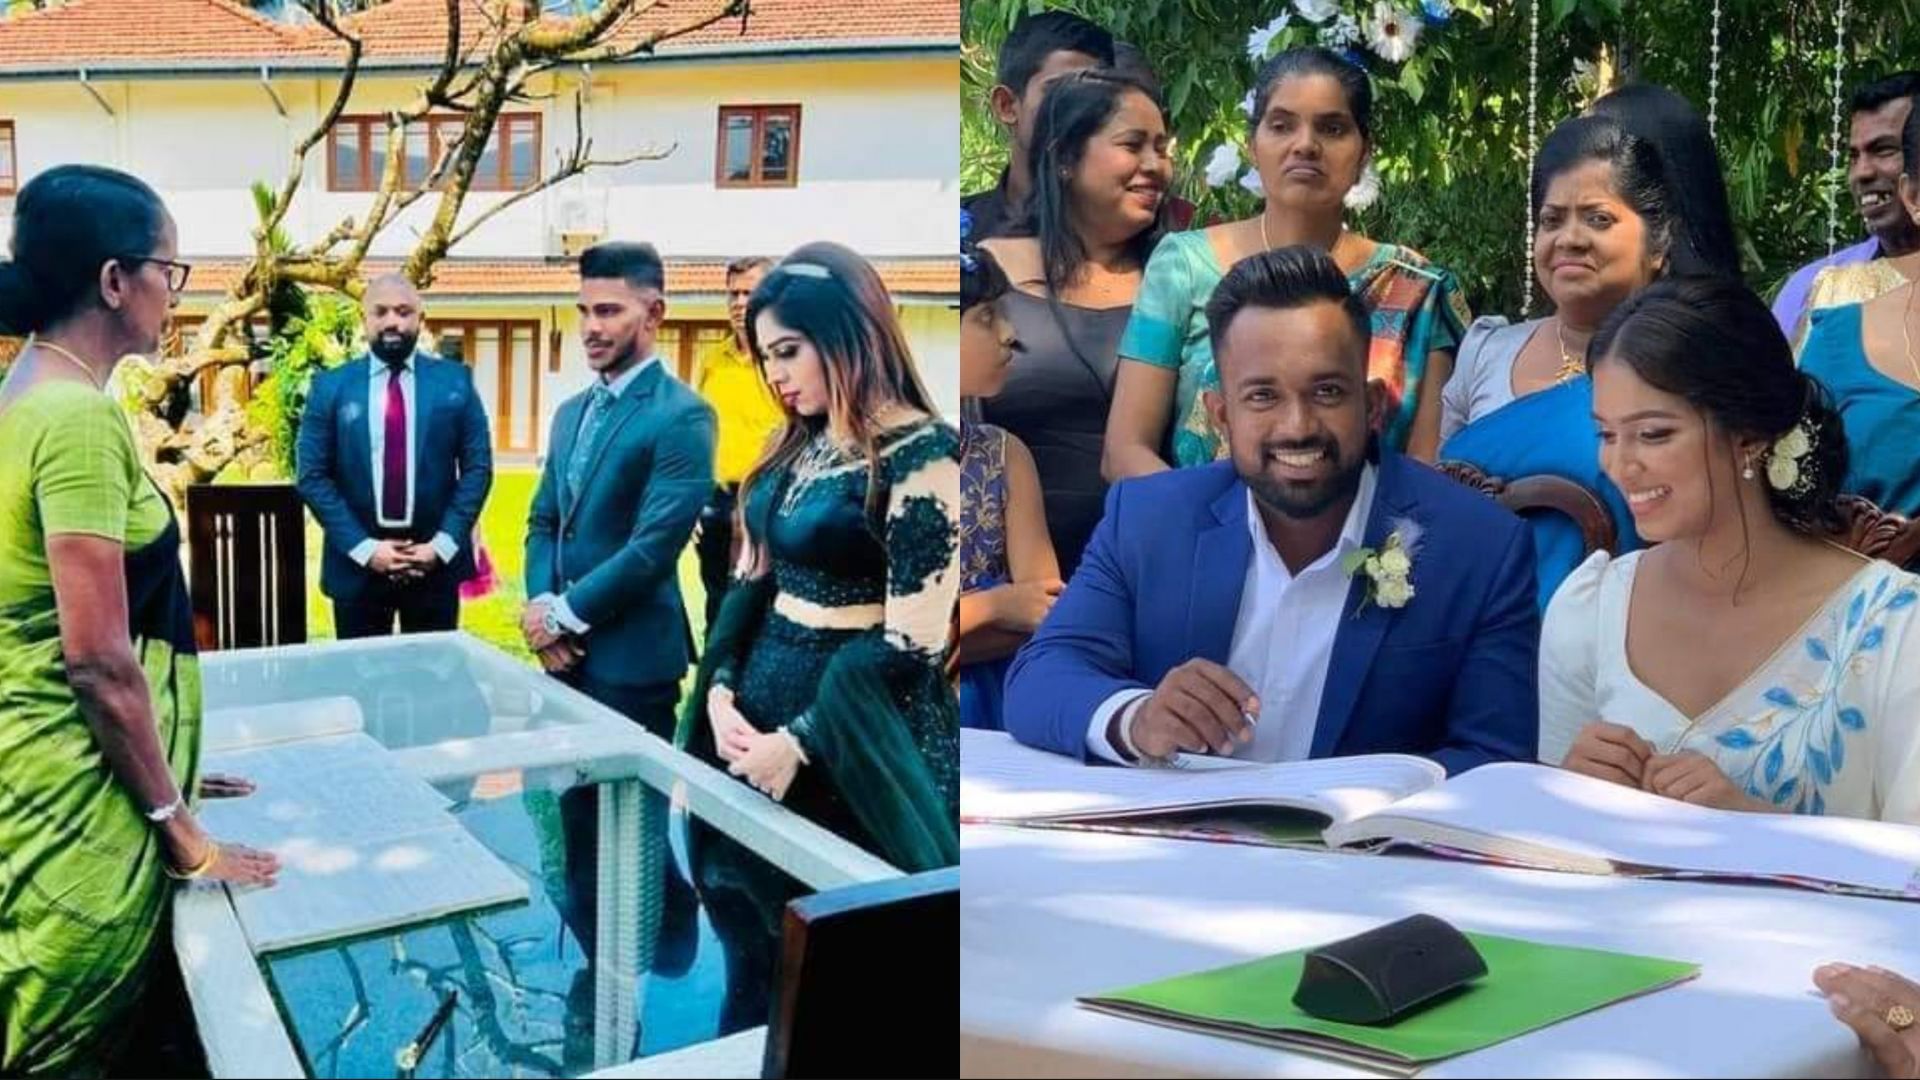 3 Sri Lankan cricketers tied the knot earlier today (Image: Twitter/SLC)